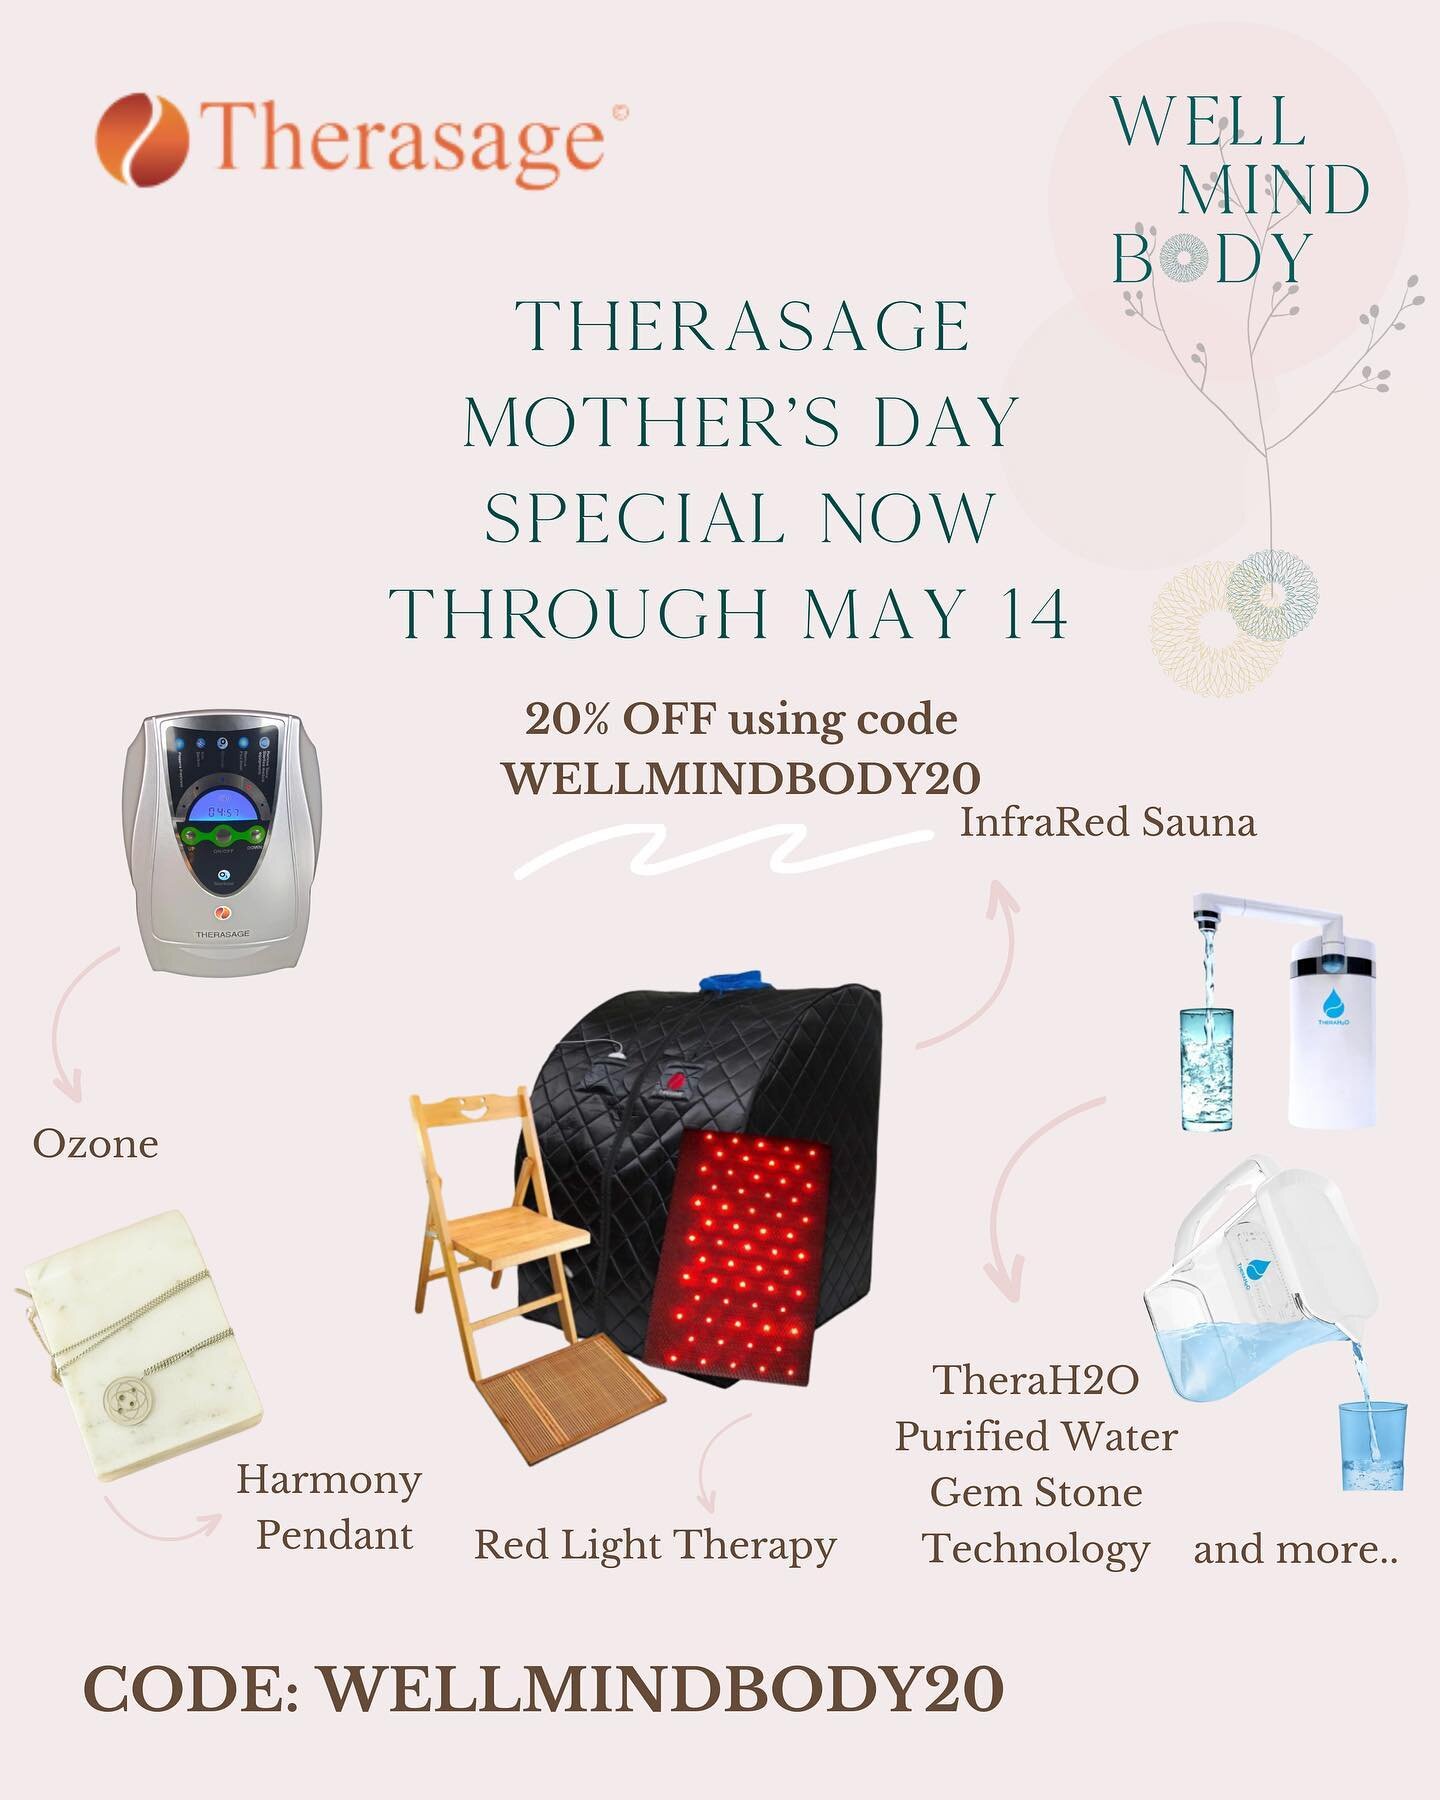 Therasage has completely revolutionized personal heating products with its patented line of Full Spectrum Infrared Portable Saunas &amp; Healing Pads, Living Water, EMF Protection Devices, Ozone made easy and more!

Shop Mother&rsquo;s Day Sale now a